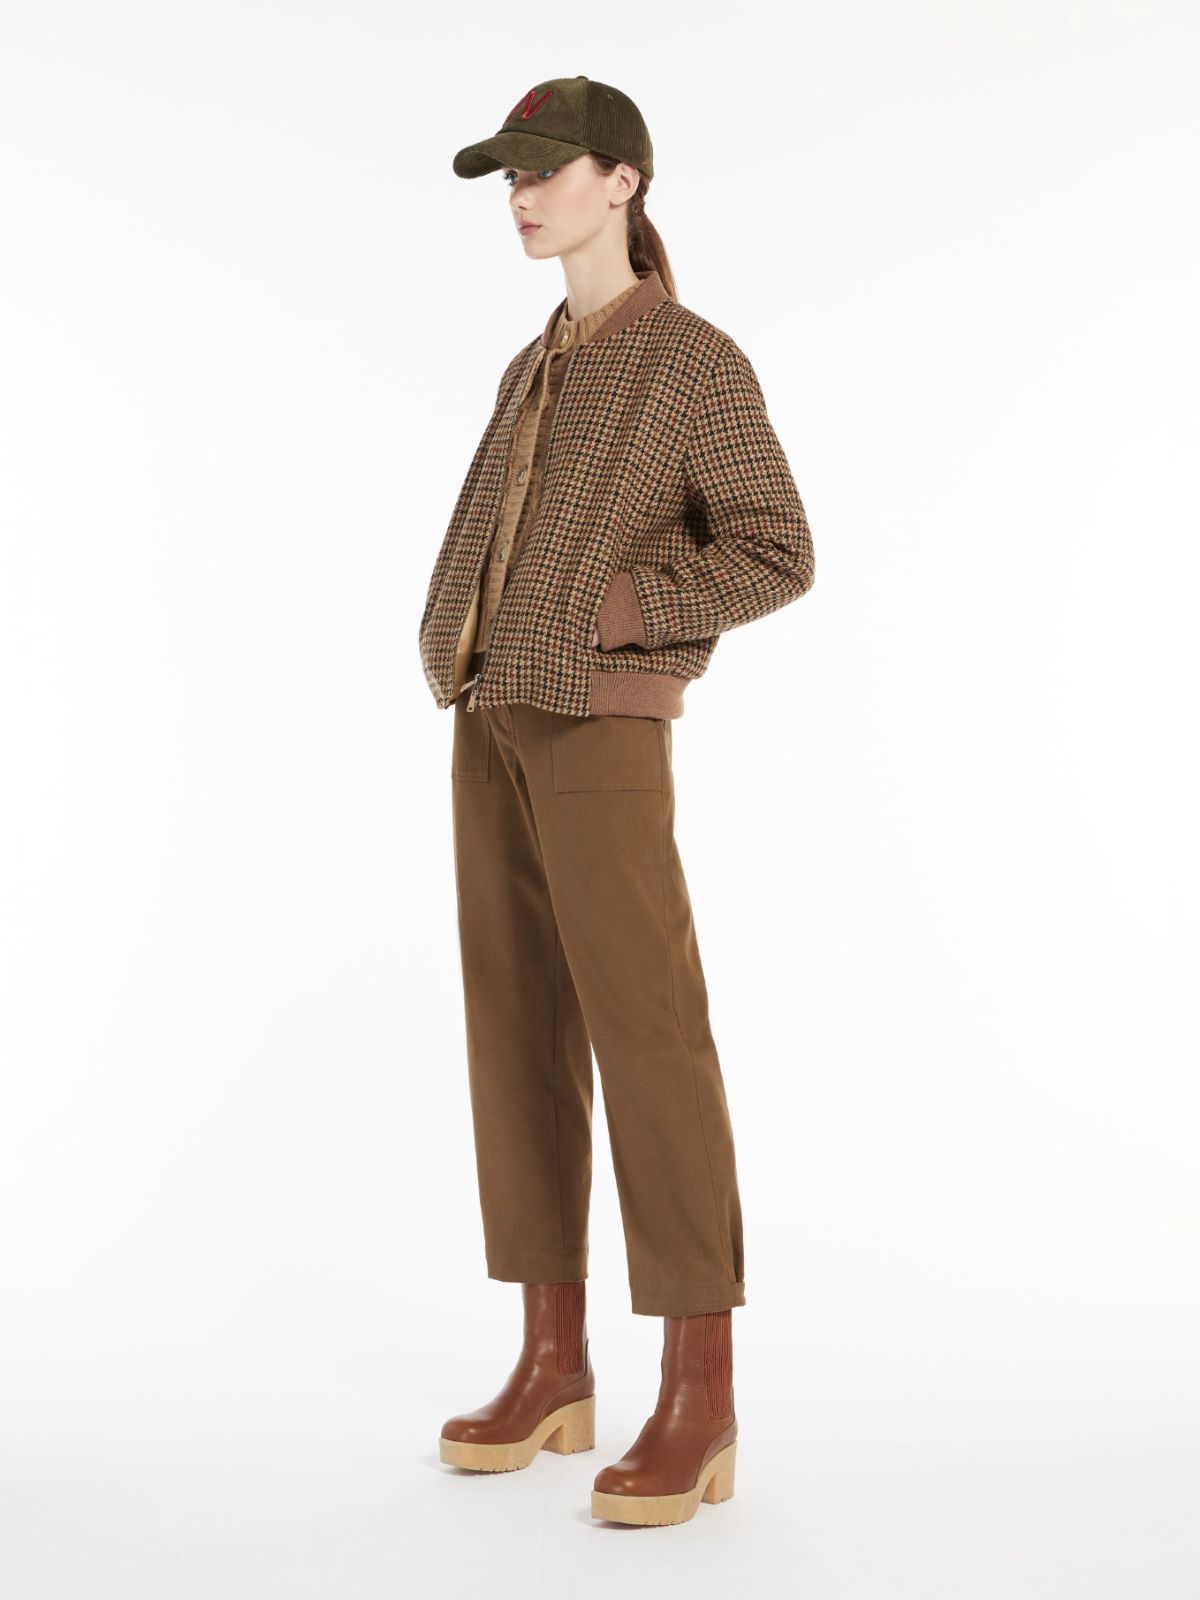 Cotton drill trousers - TOBACCO - Weekend Max Mara